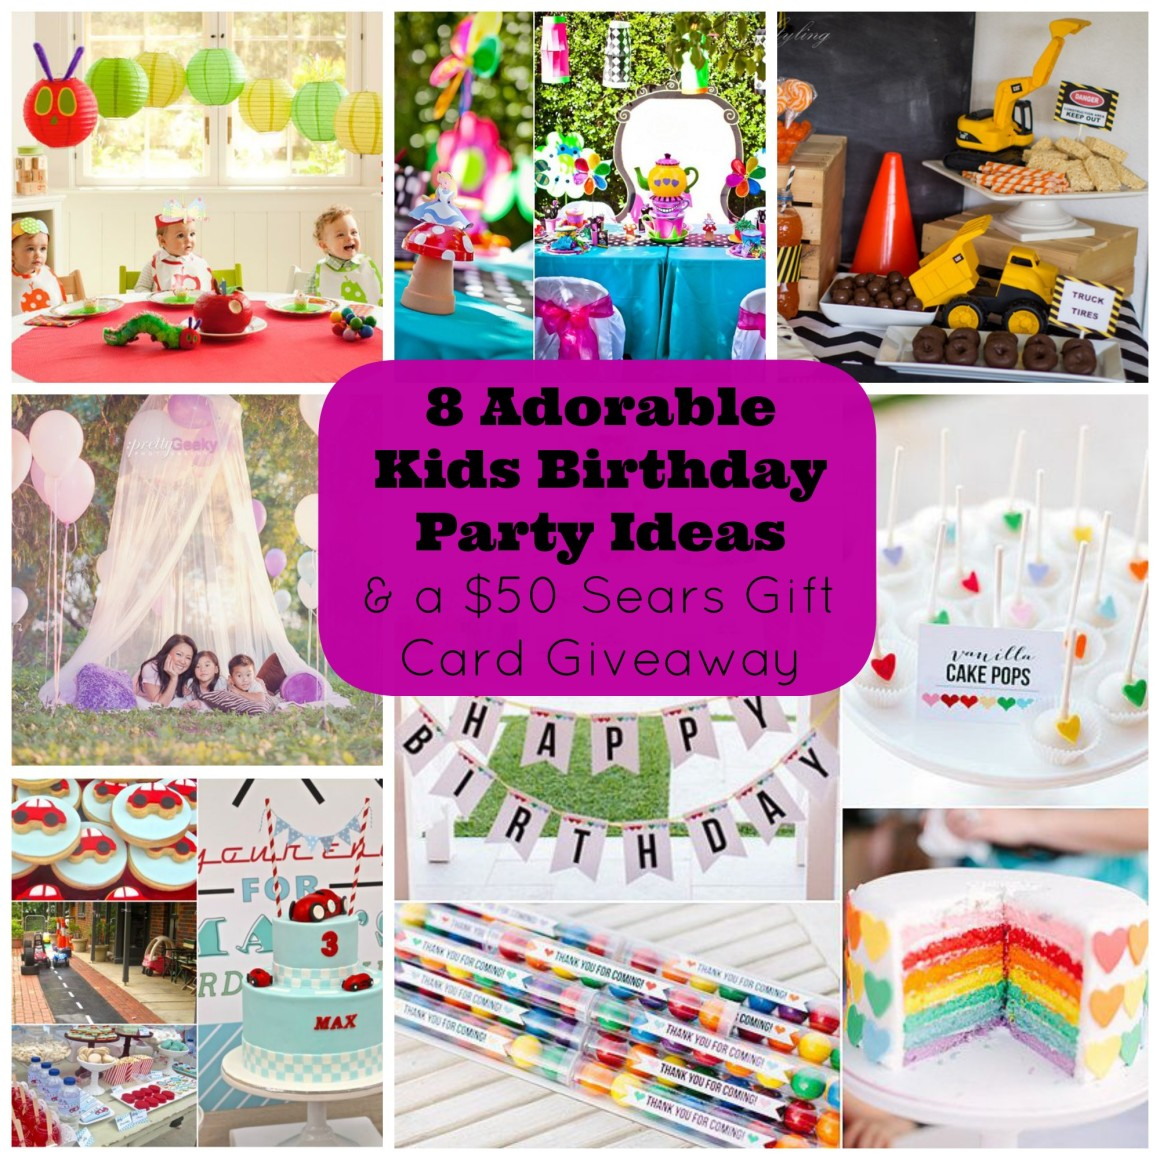 Kids Birthday Card Ideas 8 Adorable Kids Birthday Party Ideas And A Giveaway For A 50 Sears